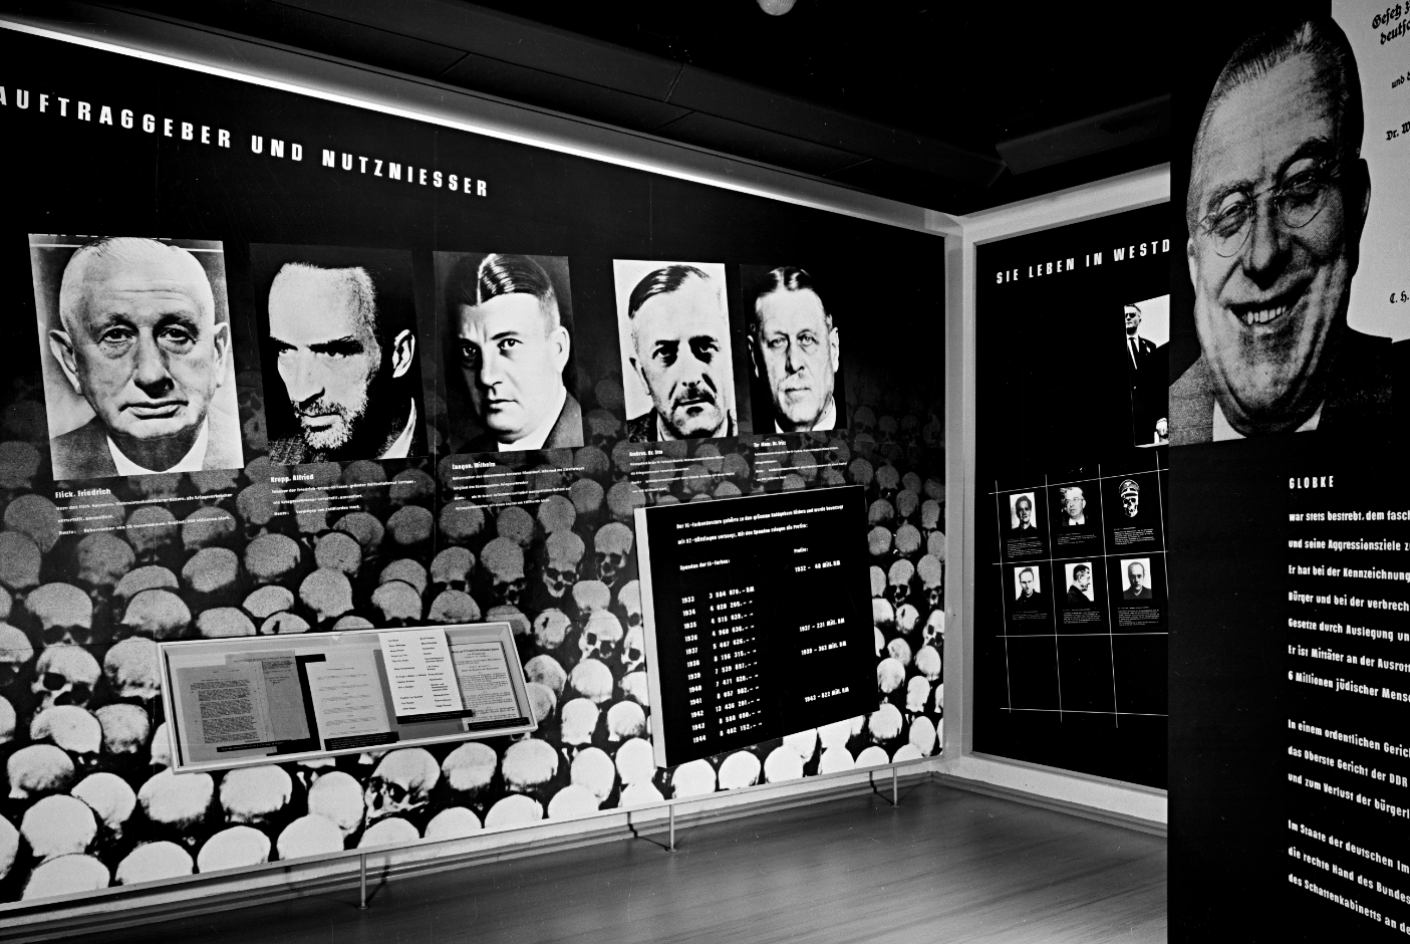 The picture shows one of the old exhibition rooms in the former disinfection. The room deals with clients and profiteers of the concentration camp Buchenwald. On the far right is a photo of the broadly grinning Hanz Globke, who at the time of the exhibition opening was Secretary of State of the FRG under Konrad Adenauer. On the left are photographs of 5 other people. The captions reveal that they are Friedrisch Flick, Alfried Krupp, Wilhelm Zangen, Dr. Otto Ambross and Dr. Fritz Ter Meer.The picture shows one of the old exhibition rooms in the former disinfection. The room deals with clients and profiteers of the concentration camp Buchenwald. On the far right is a photo of the broadly grinning Hanz Globke, who at the time of the exhibition opening was Secretary of State of the FRG under Konrad Adenauer. On the left are photographs of 5 other people. The captions reveal that they are Friedrisch Flick, Alfried Krupp, Wilhelm Zangen, Dr. Otto Ambross and Dr. Fritz Ter Meer.